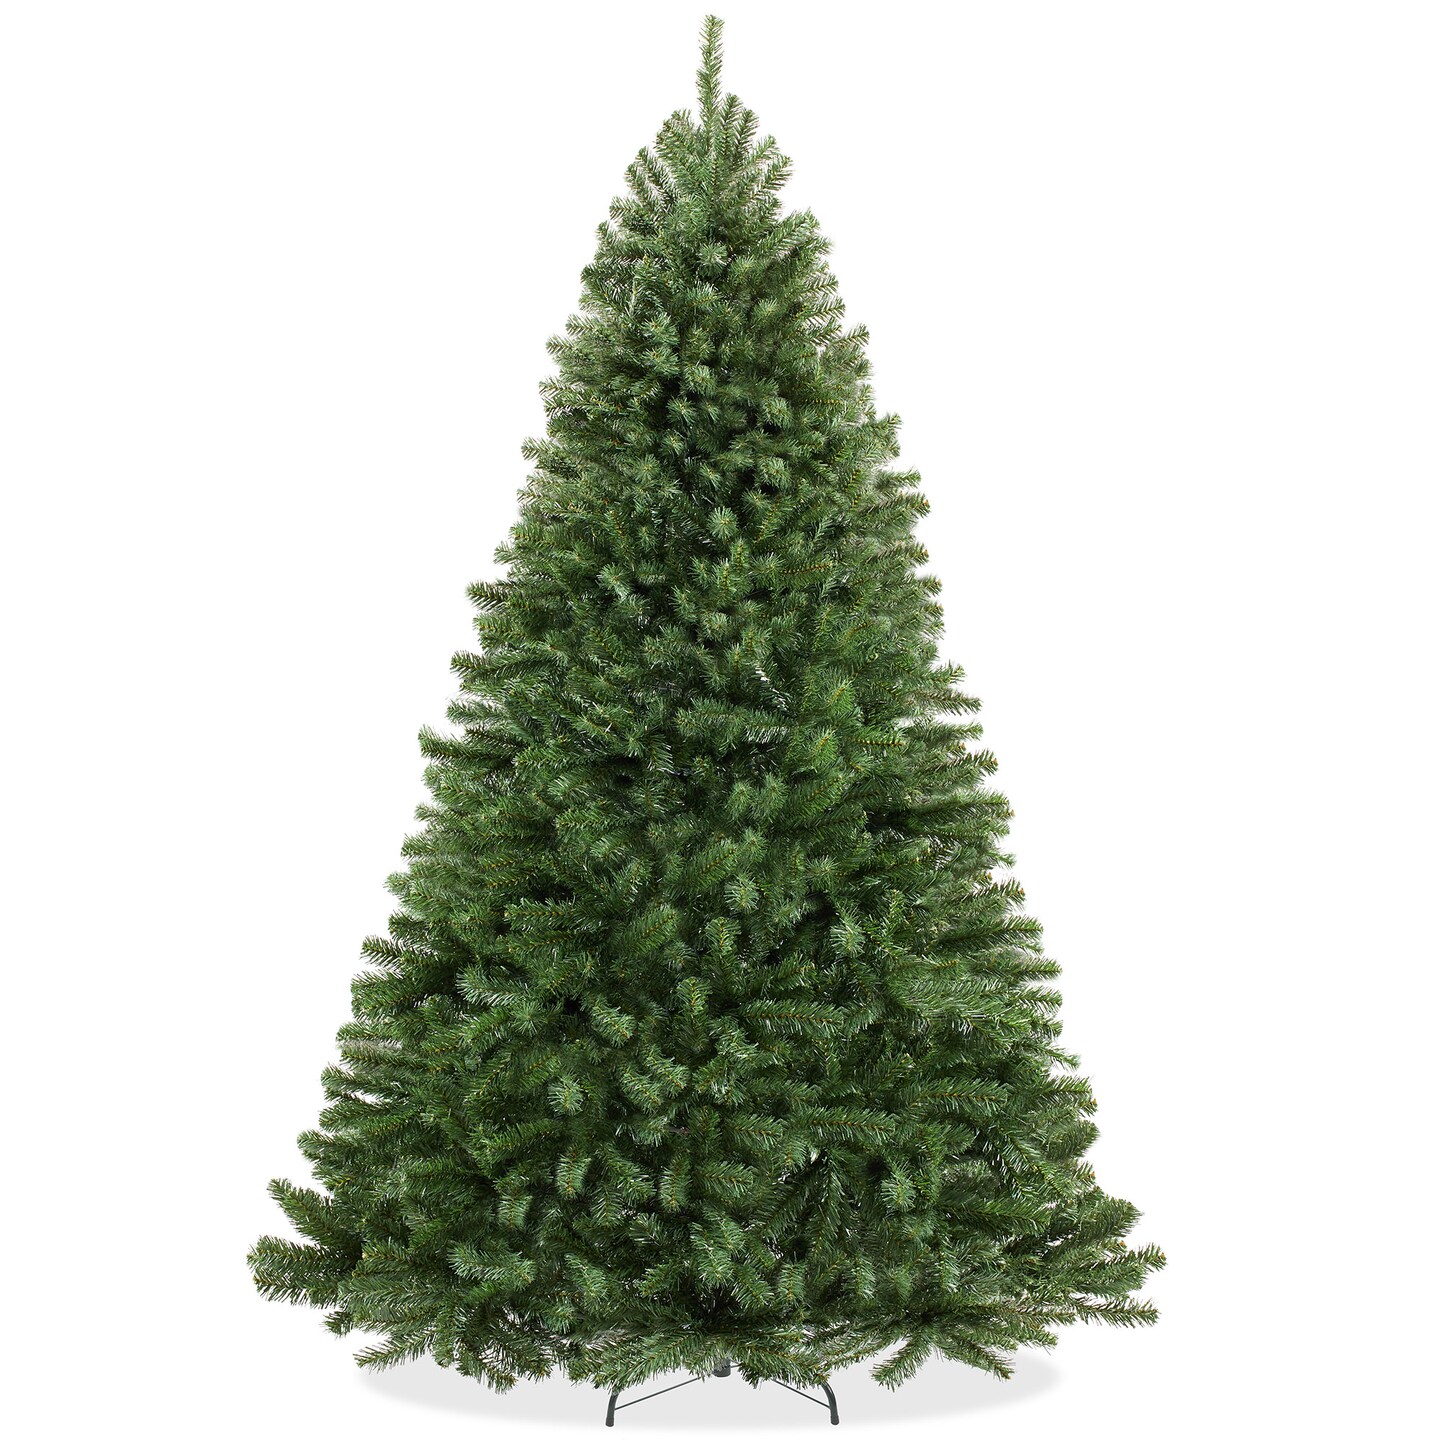 Casafield Realistic Green Spruce Artificial Holiday Christmas Tree with Sturdy Metal Stand